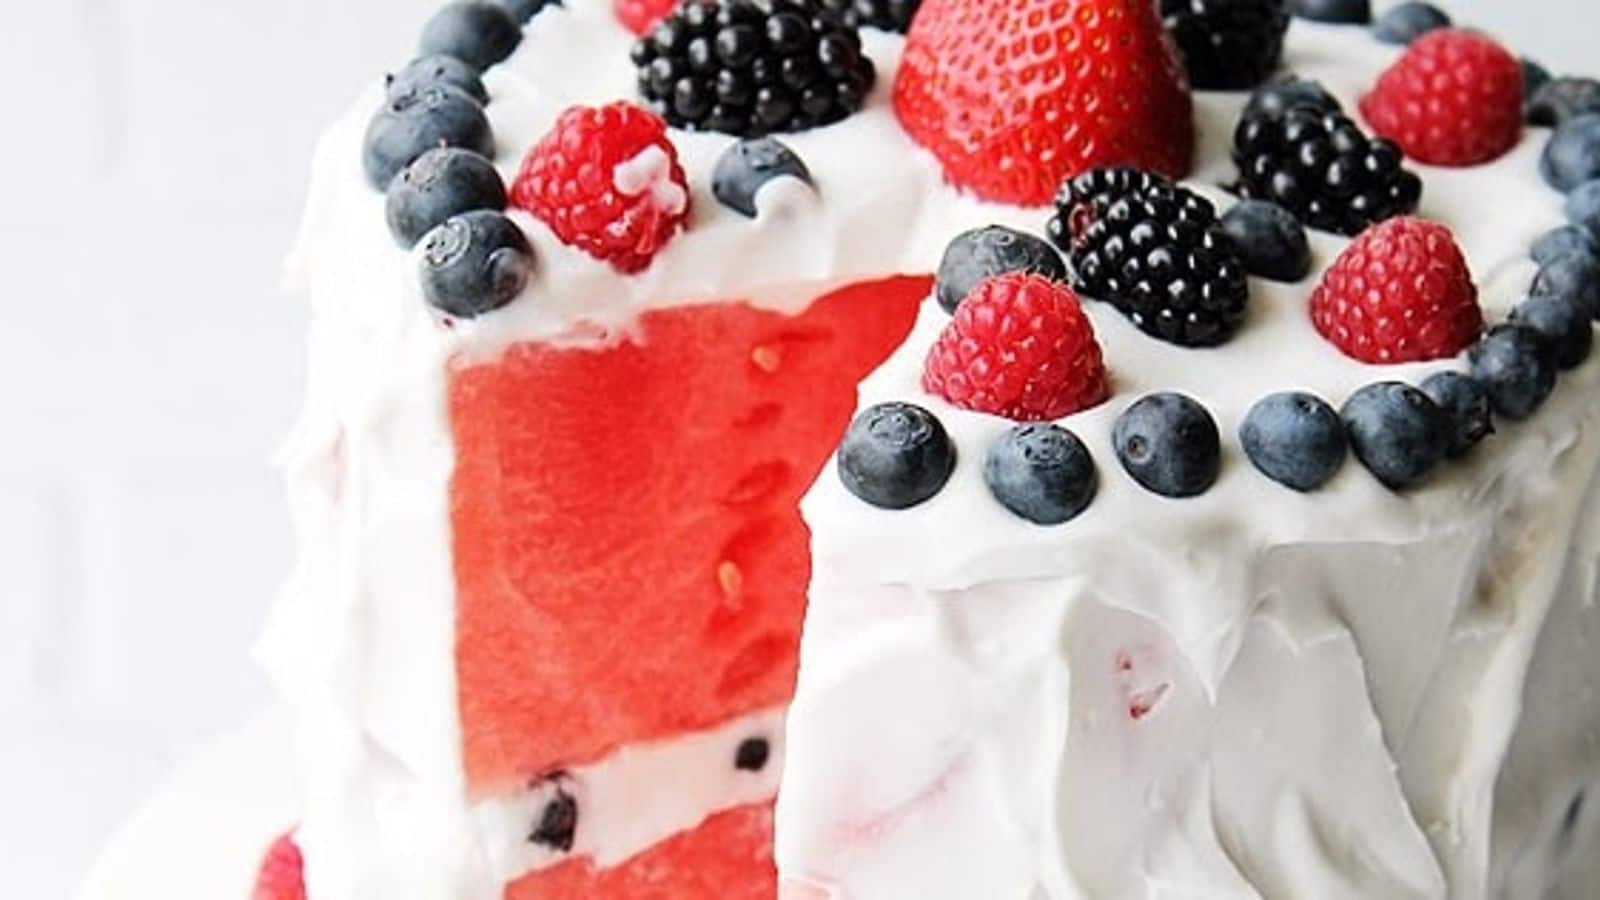 Tuck into these watermelon-based vegan desserts